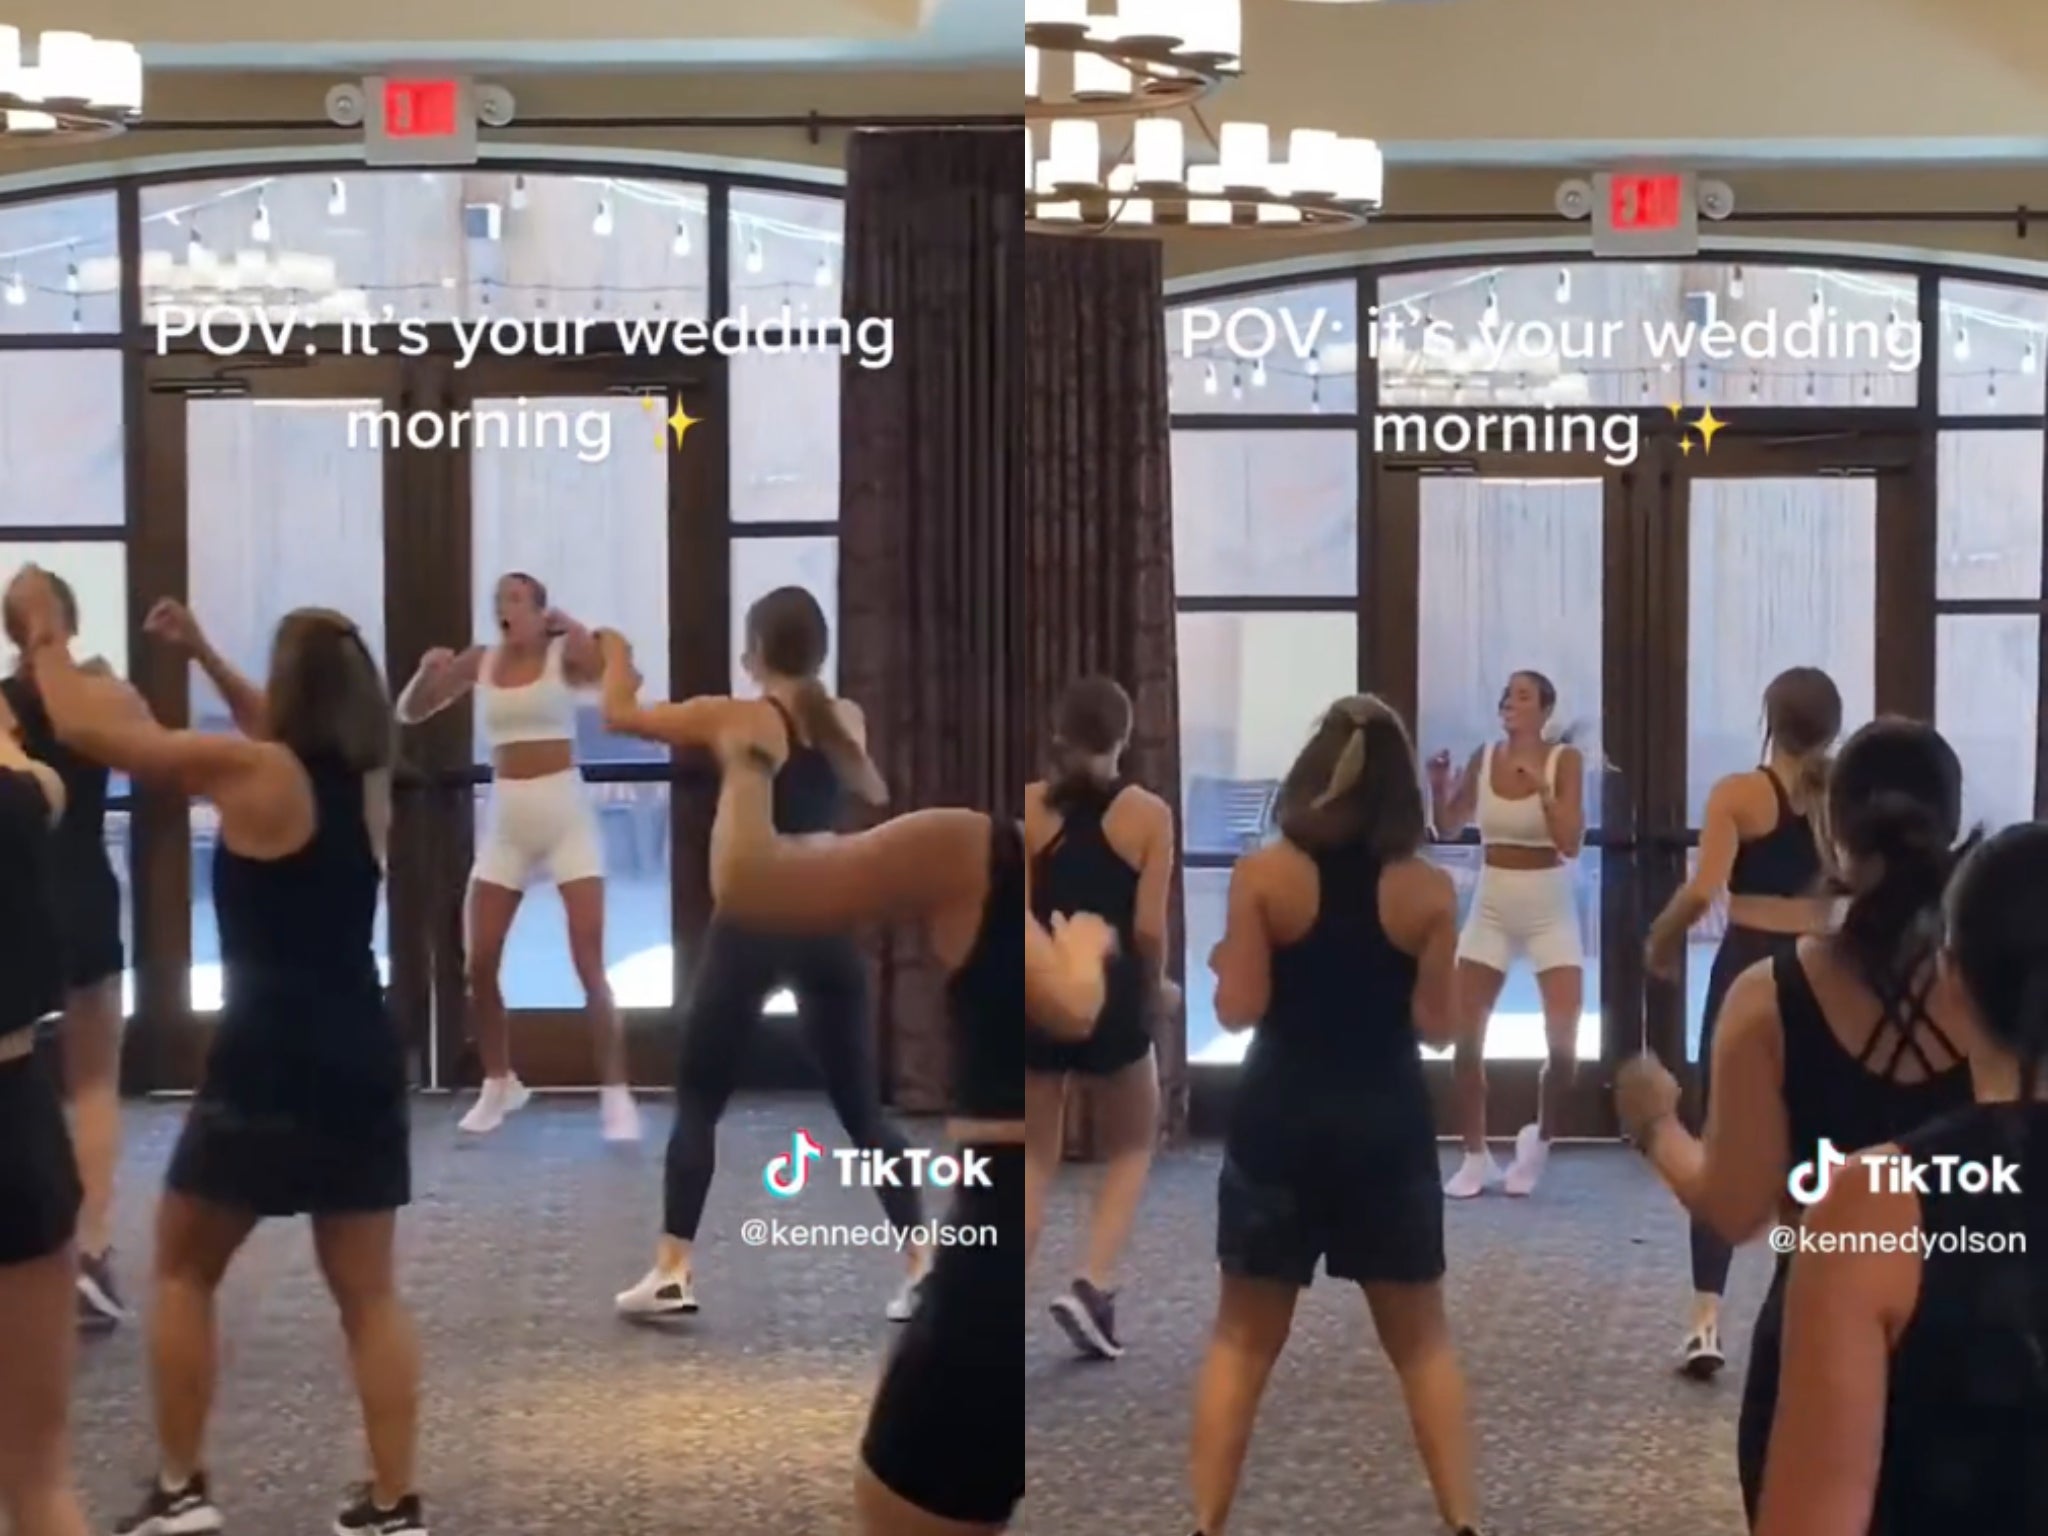 Fitness instructor Kennedy Olson has gone viral after posting a video of herself working out with her bridesmaids on the morning of her wedding day